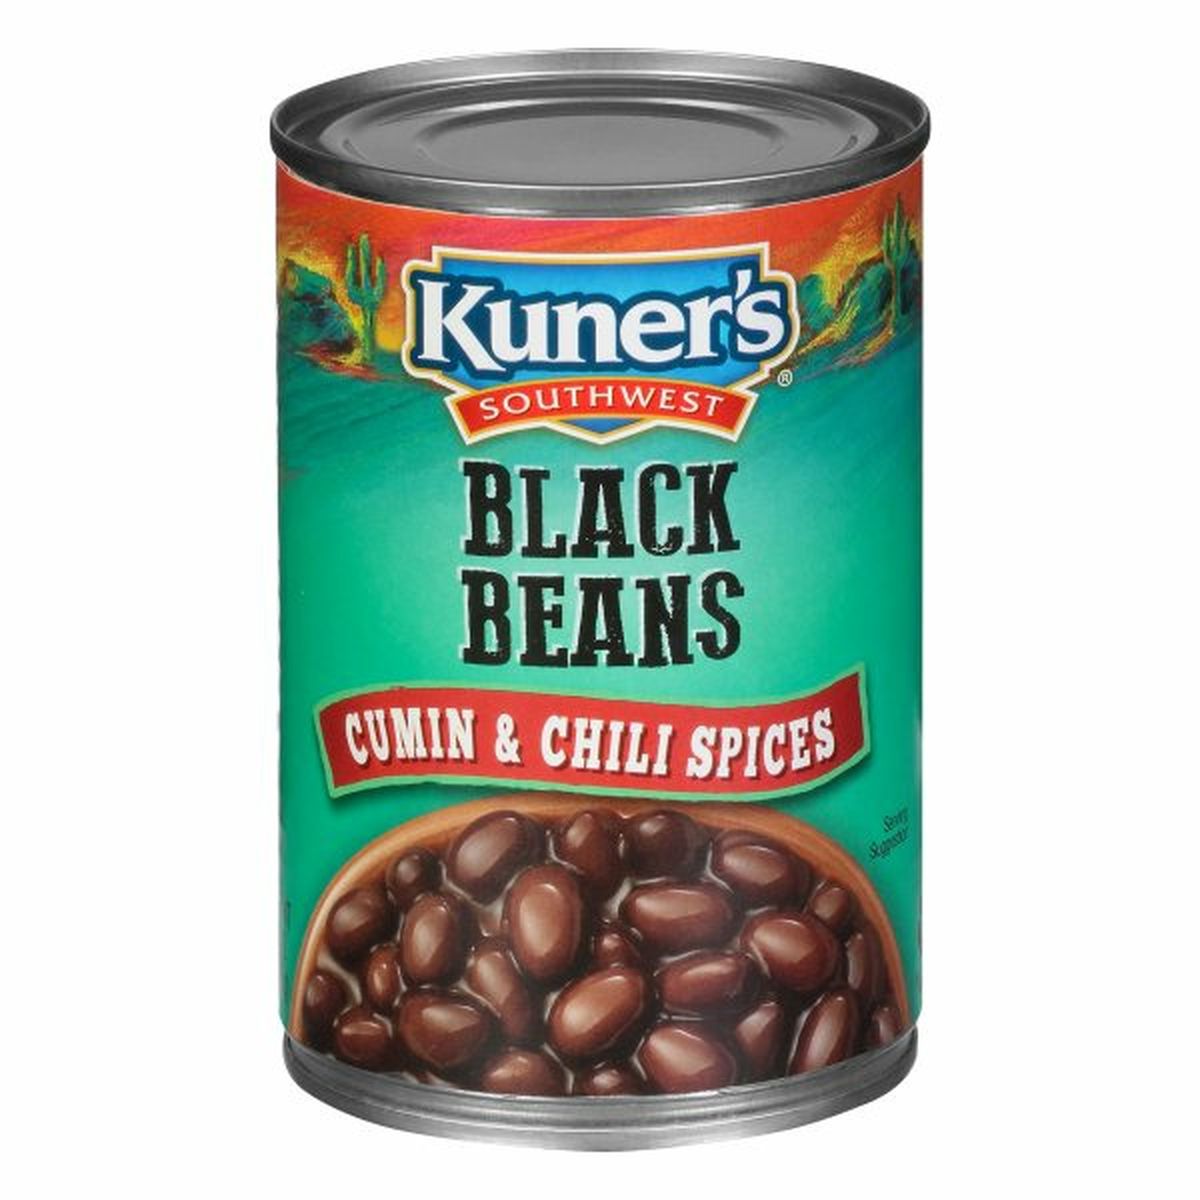 Calories in Kuner's Southwest Black Beans, Cumin & Chili Spices